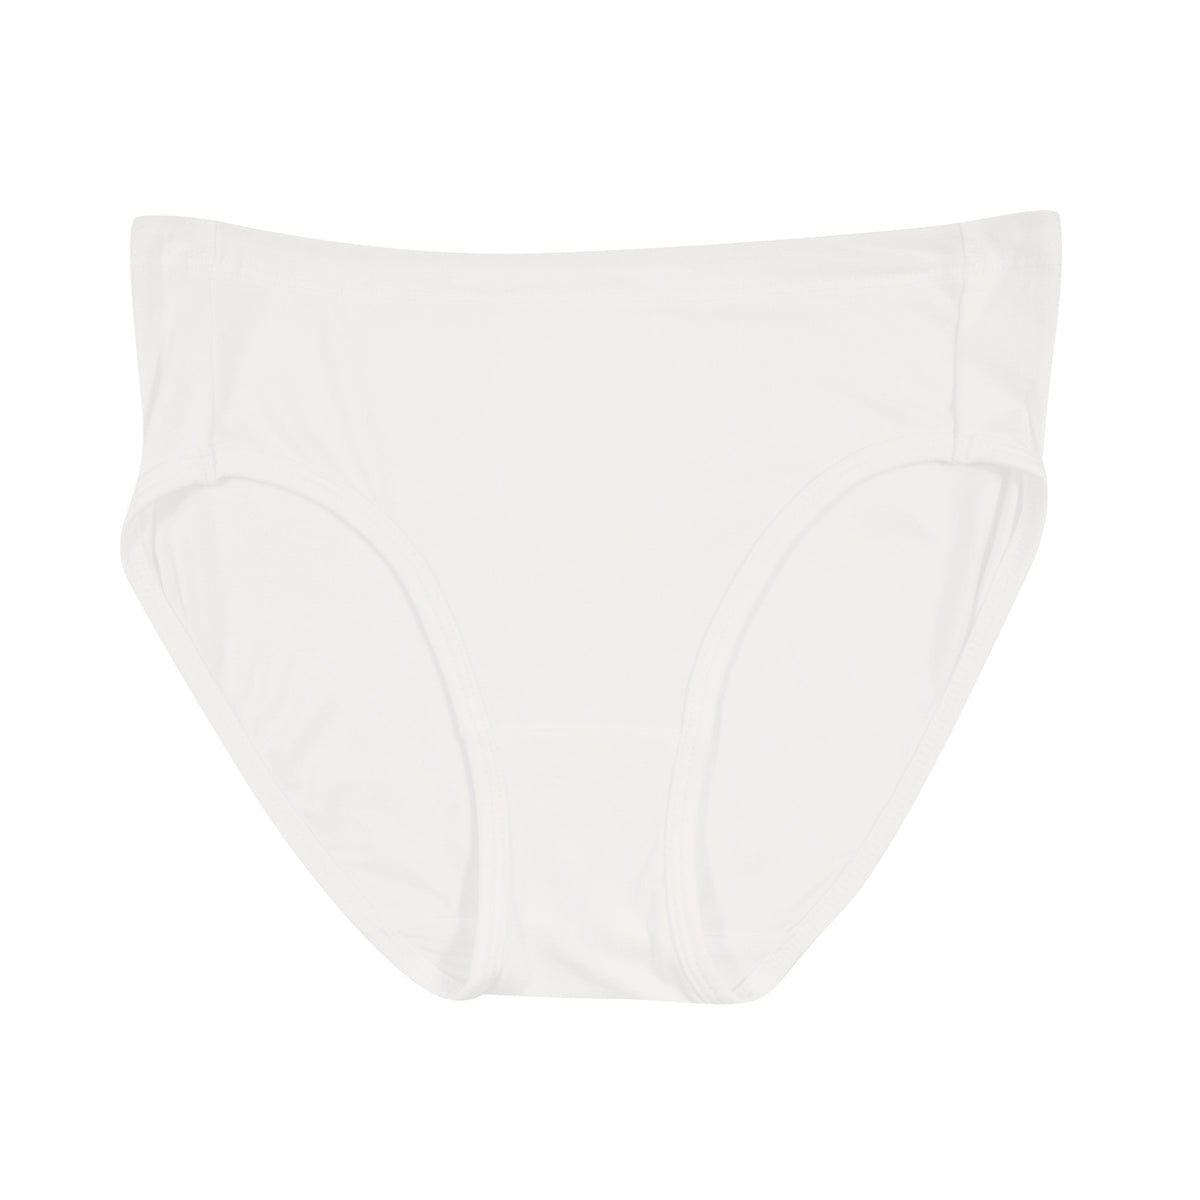 Non-Woven Women's Panties: Soft, Breathable & Durable for All Activities!